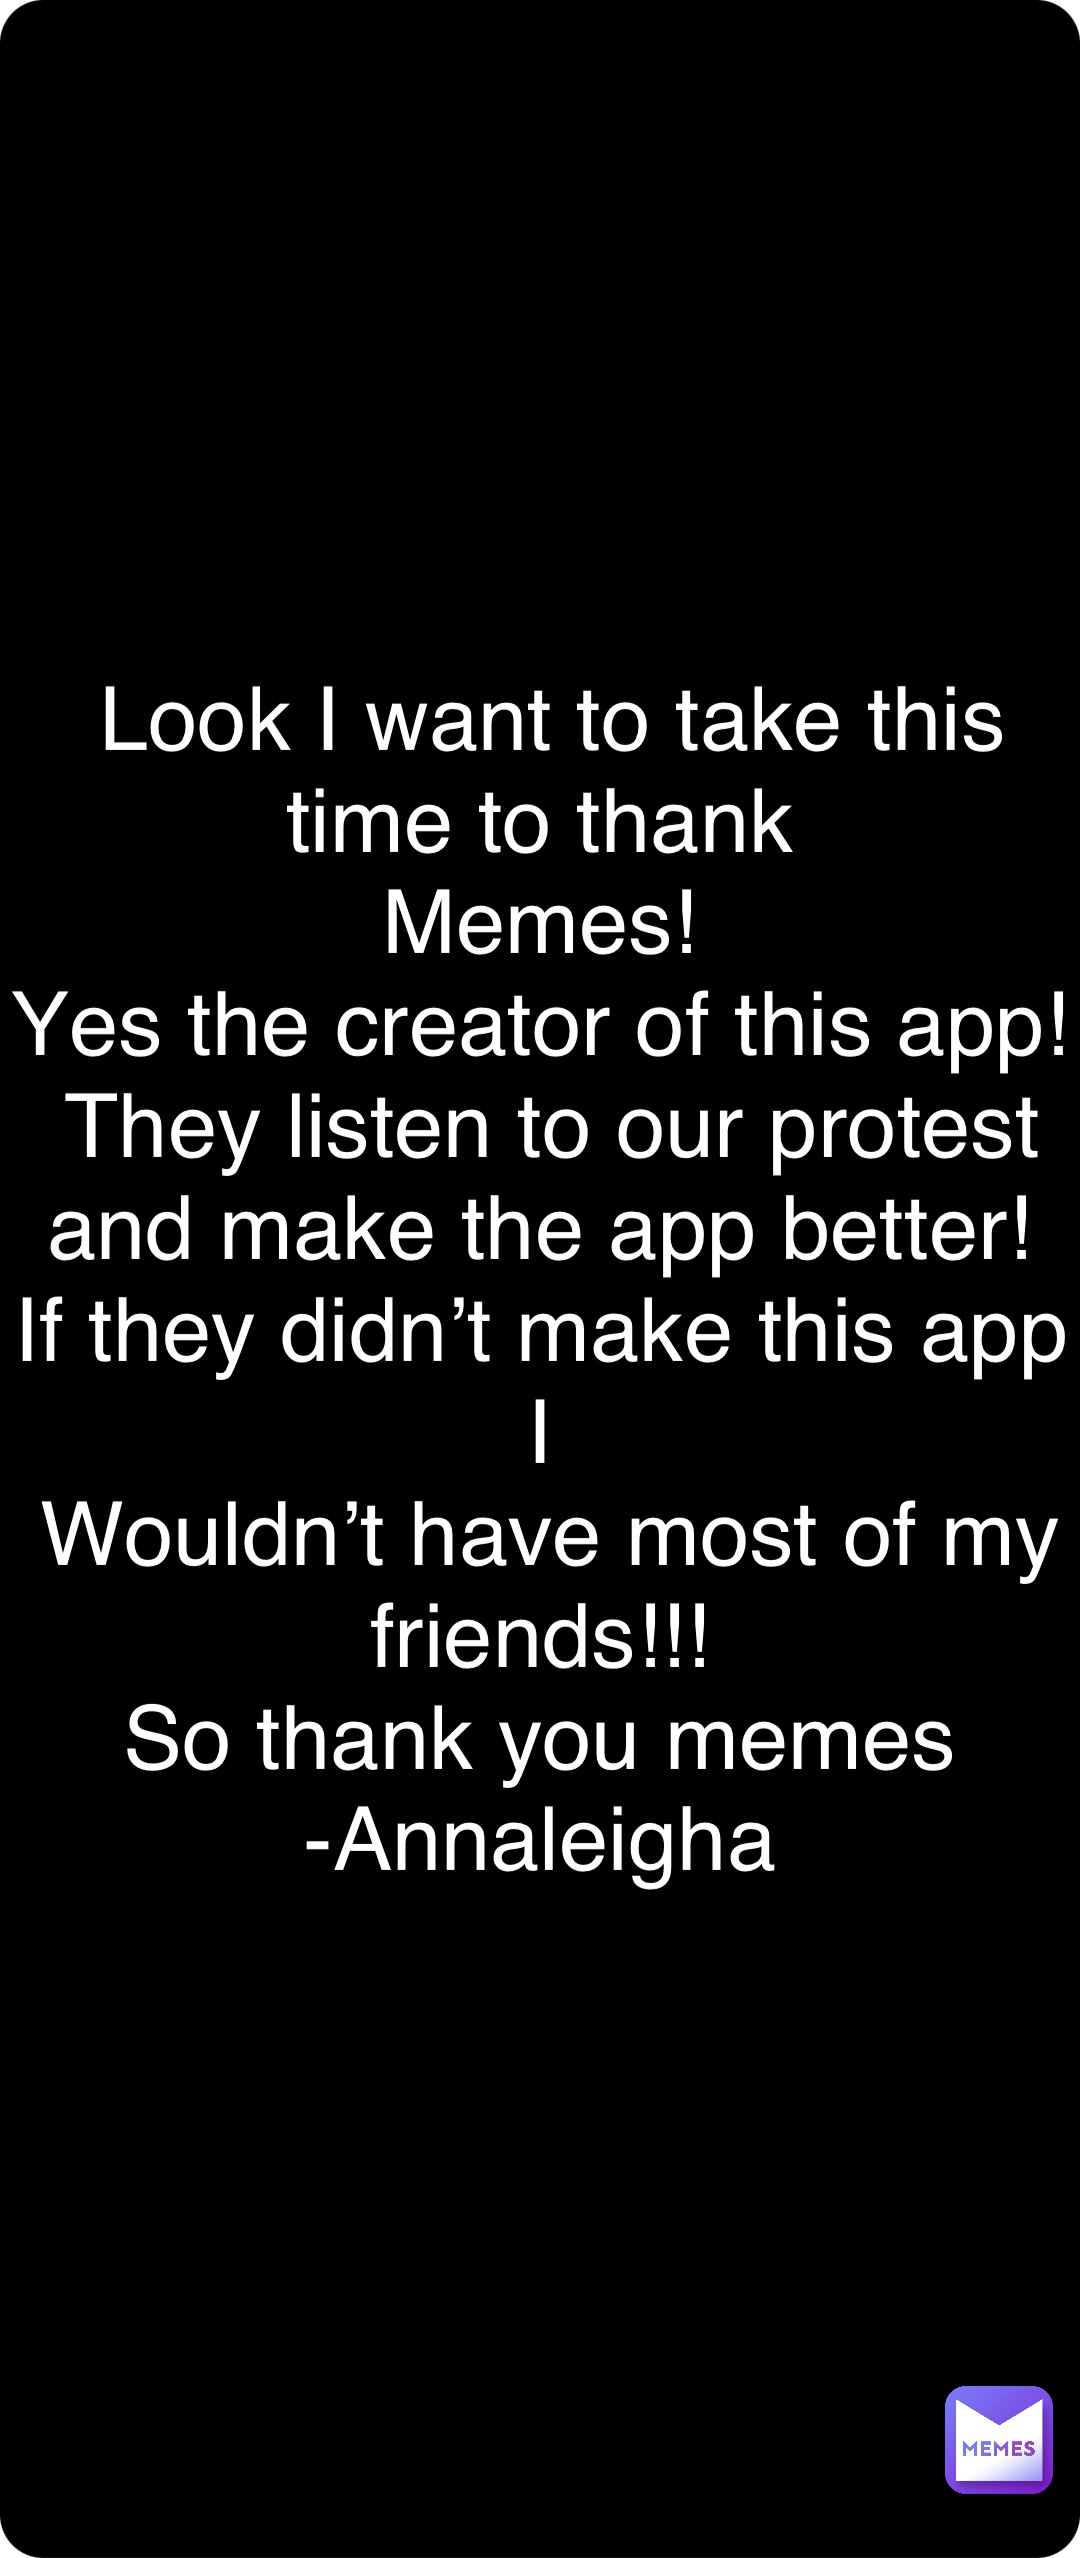 Double tap to edit Look I want to take this time to thank
Memes!
Yes the creator of this app!
They listen to our protest and make the app better!
If they didn’t make this app I
Wouldn’t have most of my friends!!!
So thank you memes
-Annaleigha